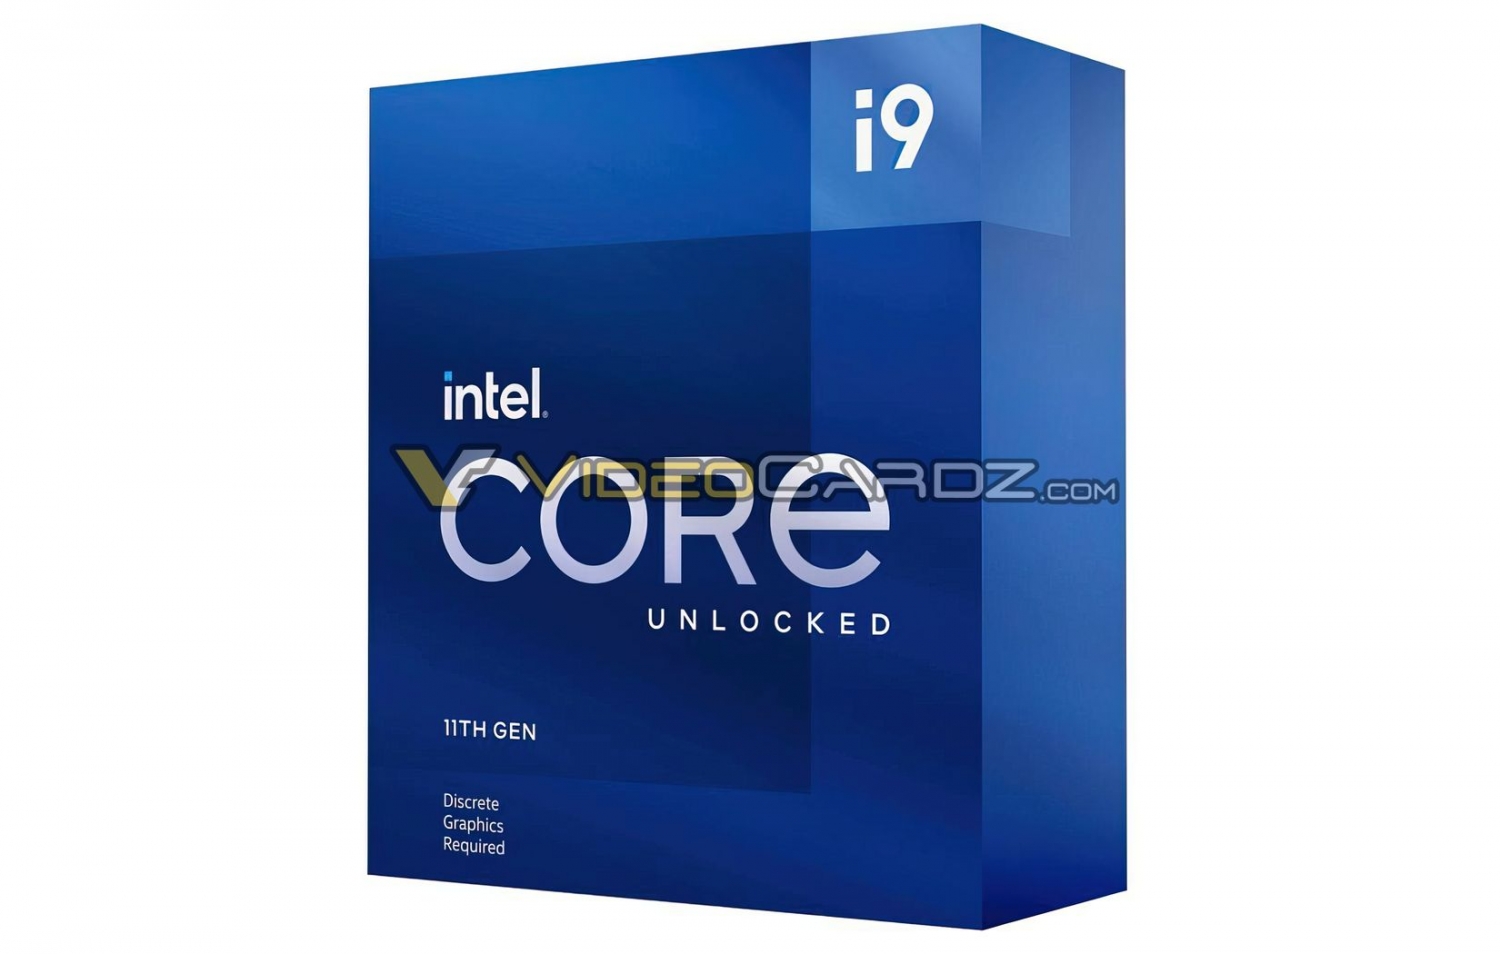 Intel's new Core i9-11900K packaging scores an A++++++++++++++ from me